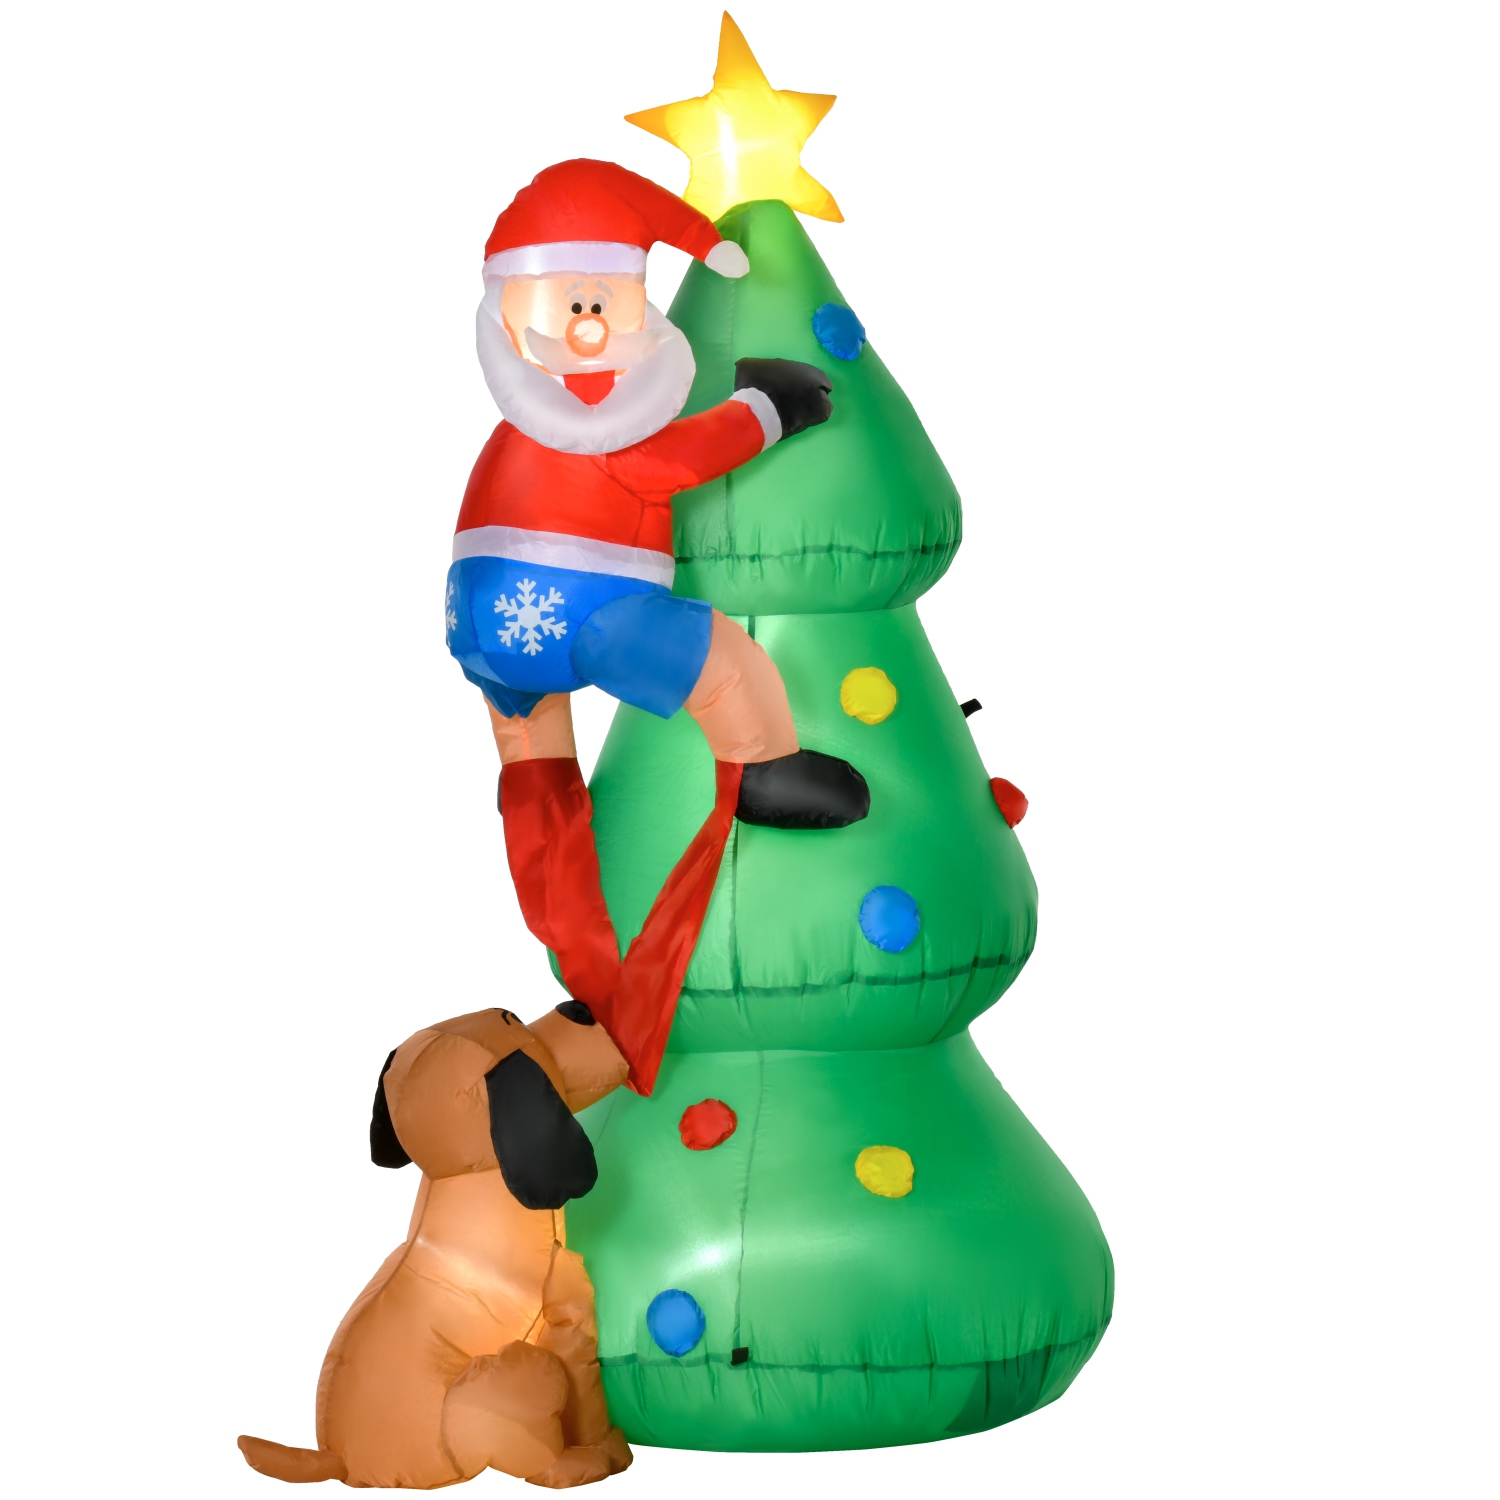 HOMCOM 6ft Inflatable Christmas Tree, Santa Claus, and Dog Lighted Up with LED Lights for Indoor, Outdoor, Home, Garden, Lawn